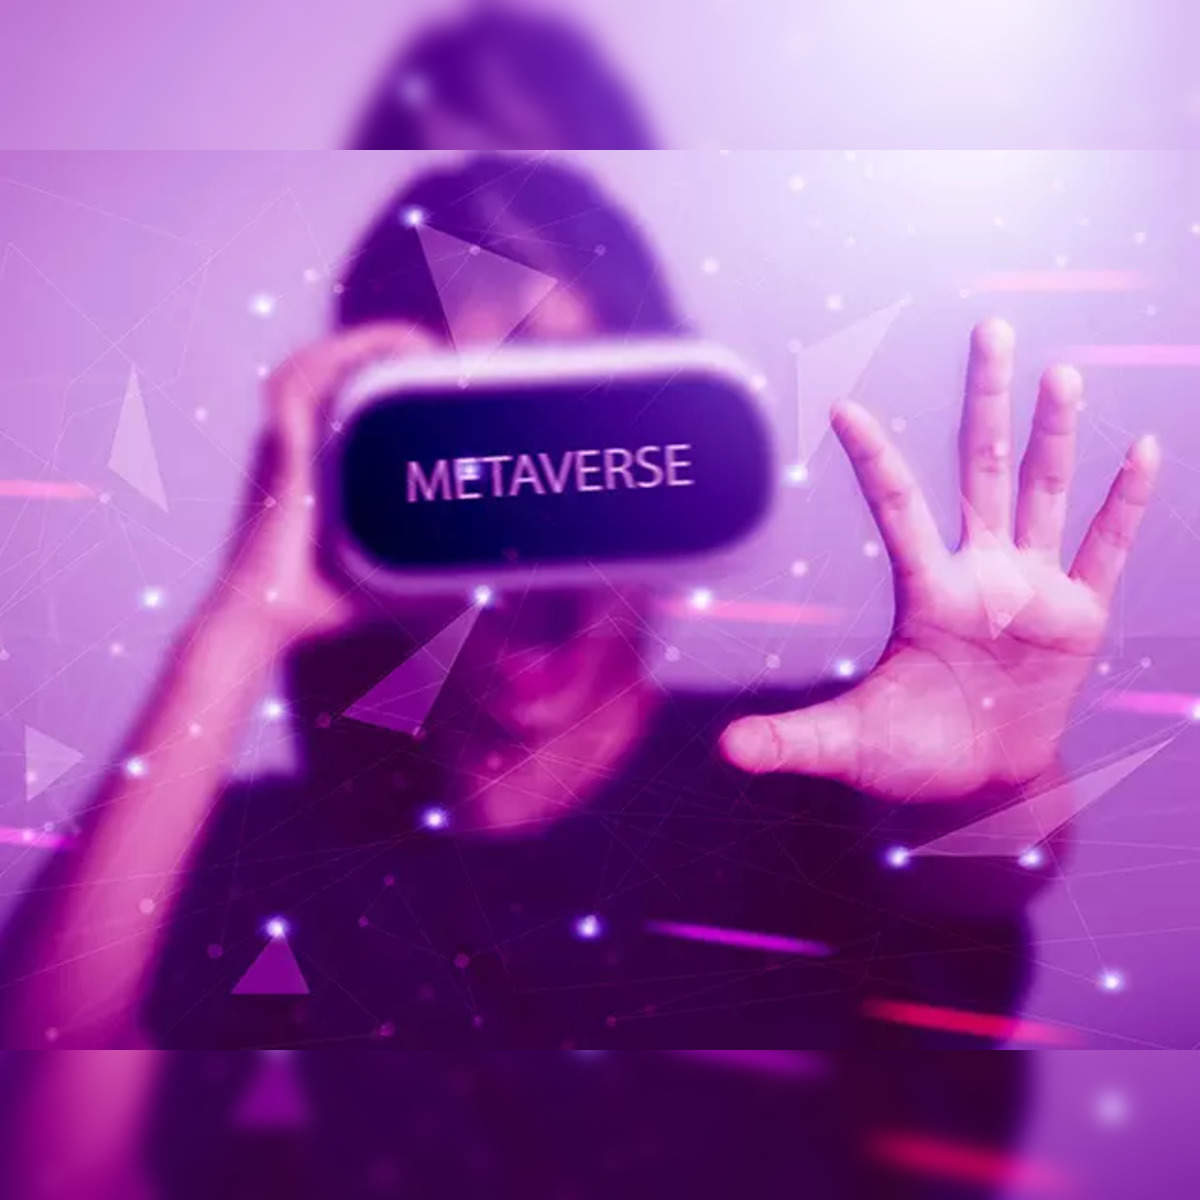 Crypto, NFTs, and the Metaverse–How They Will Work Together - Veritone